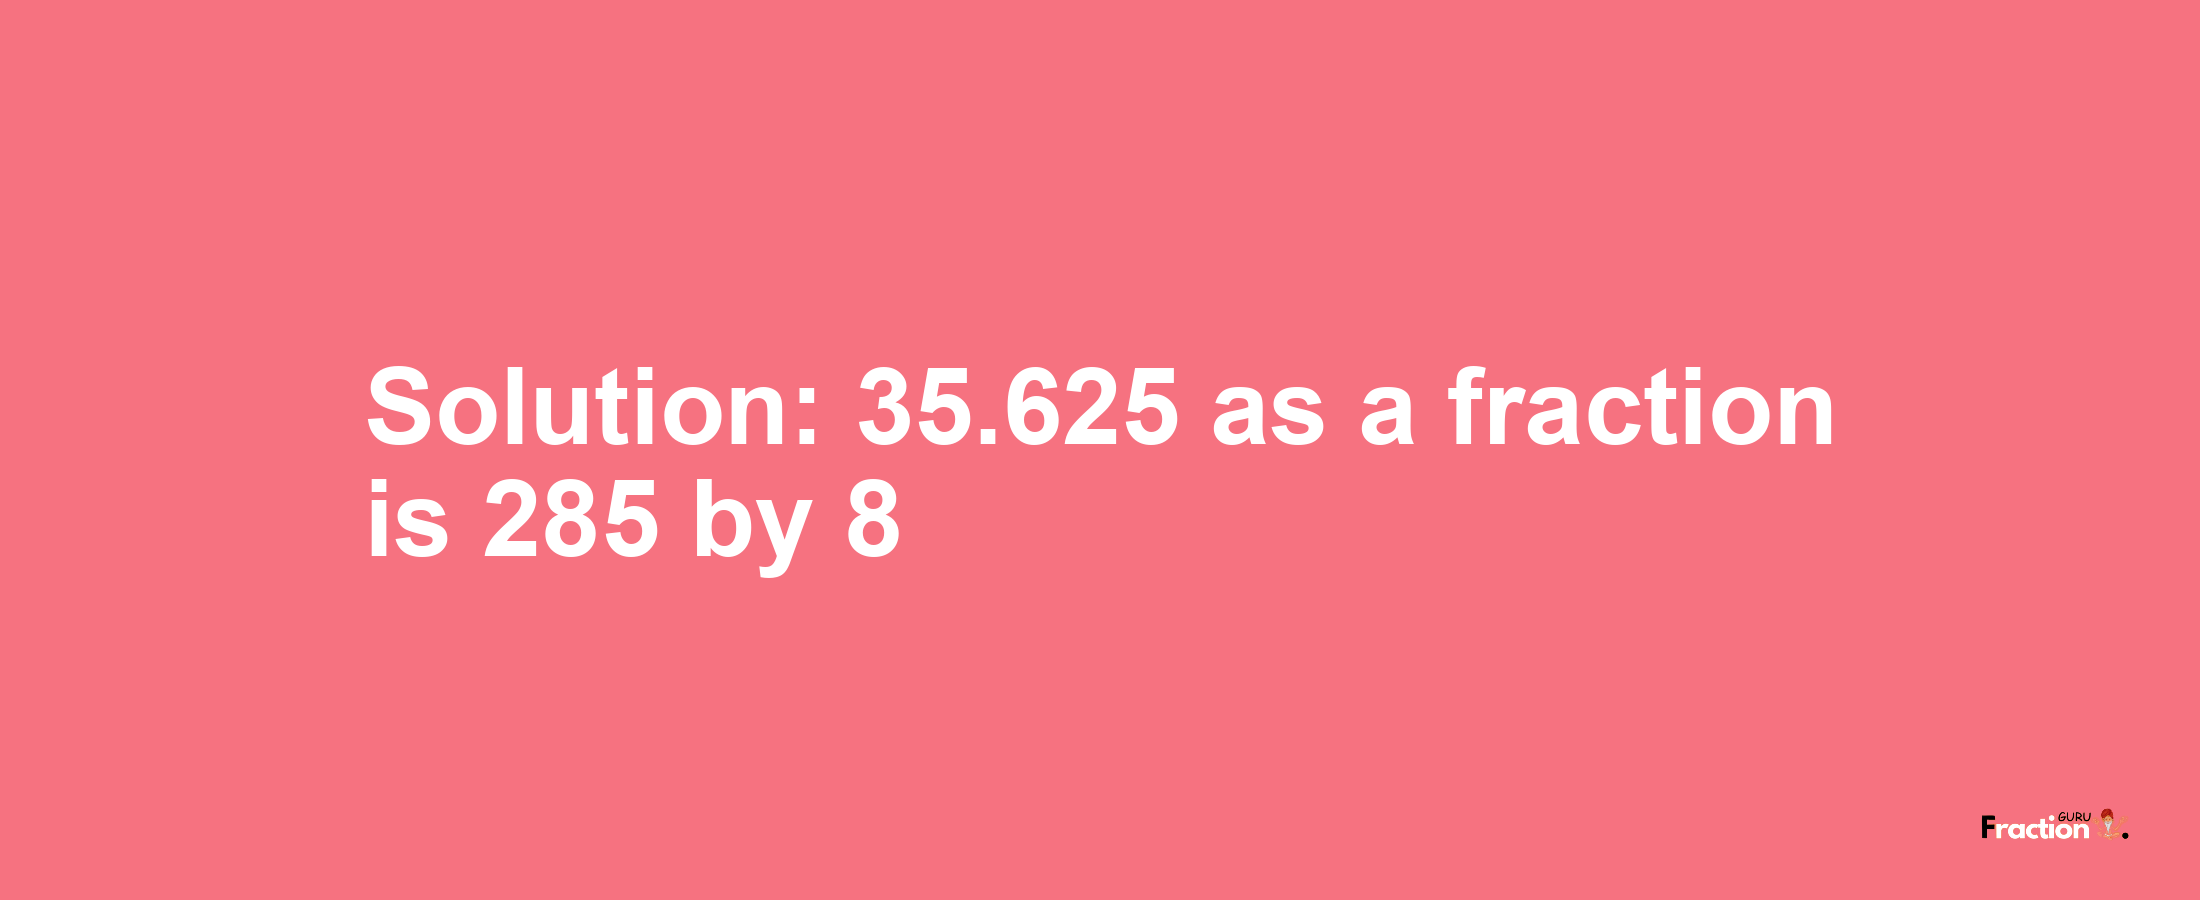 Solution:35.625 as a fraction is 285/8